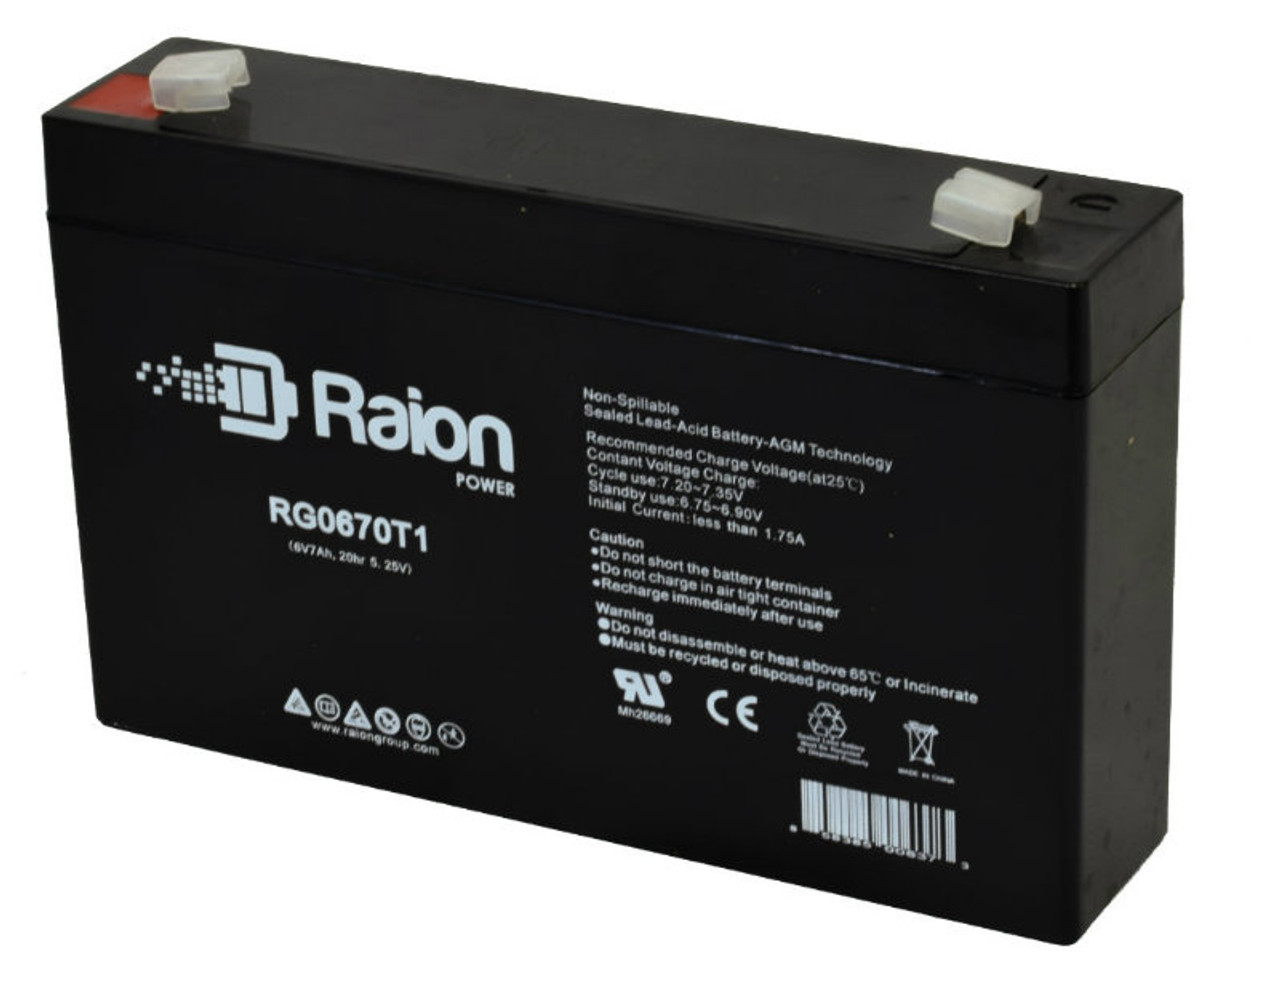 Raion Power RG0670T1 Replacement Battery for Expocell P206/70 OEM Battery